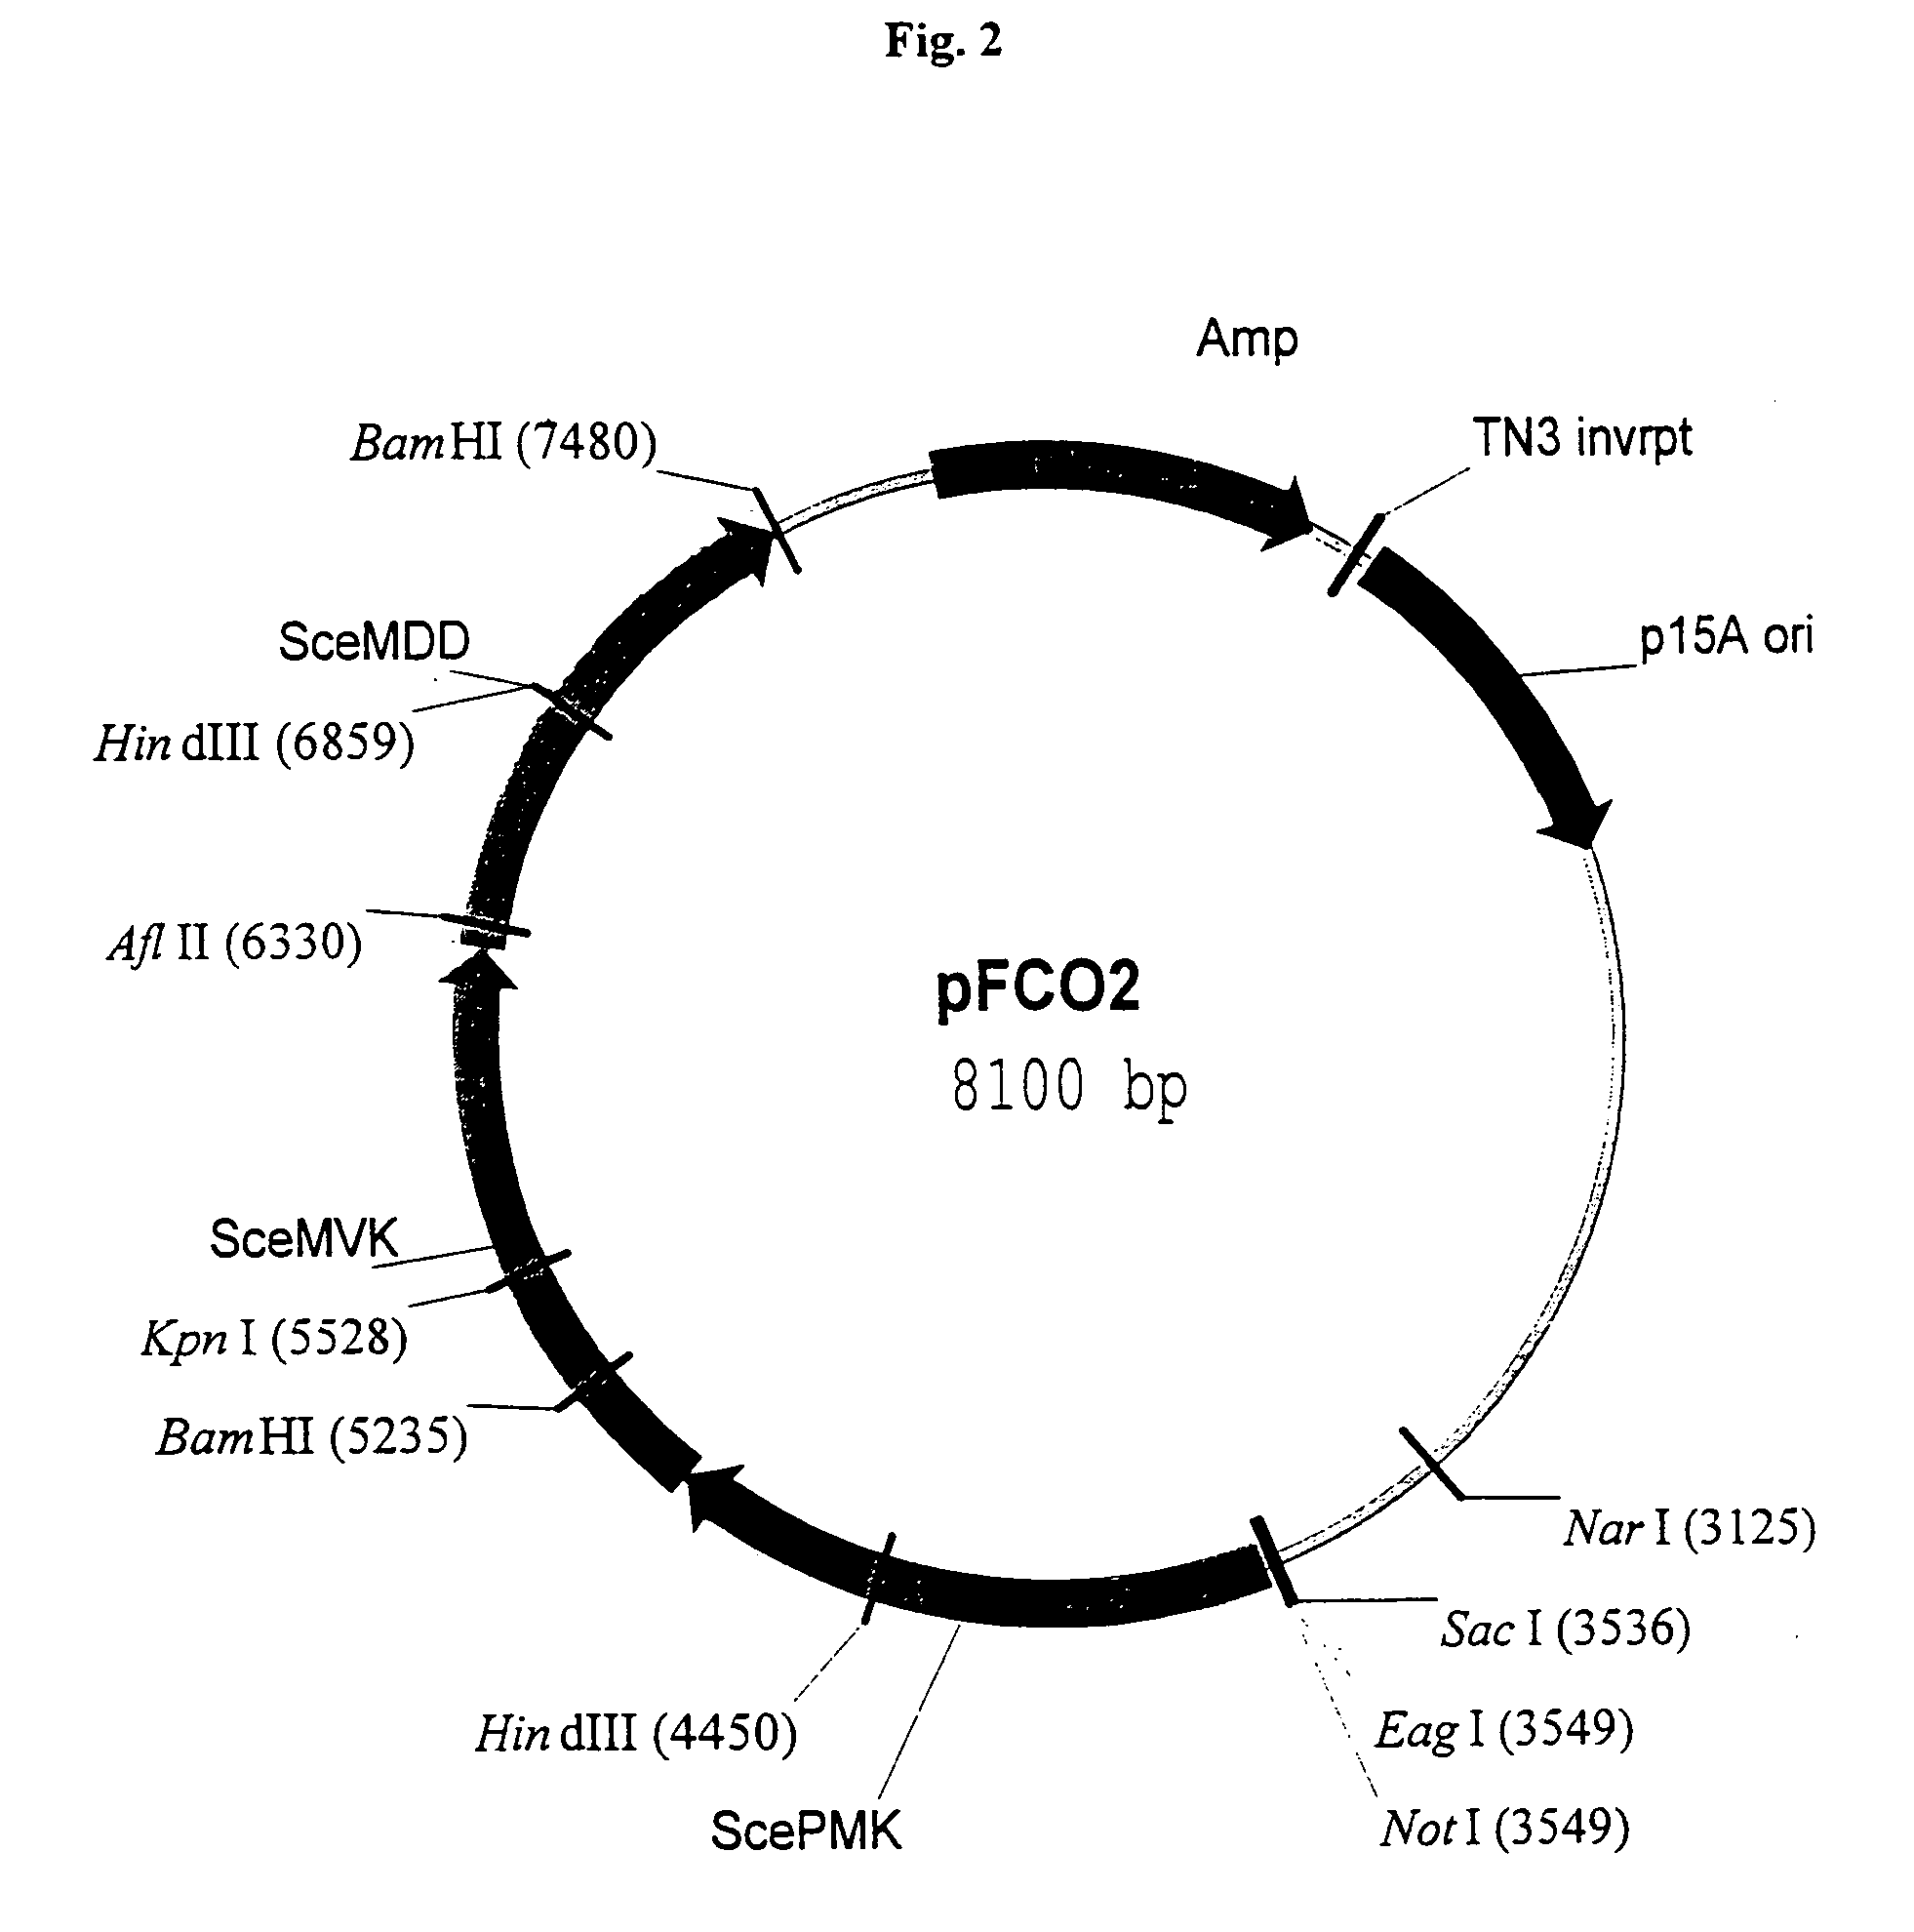 Materials and methods for increasing isoprenoid production in cells